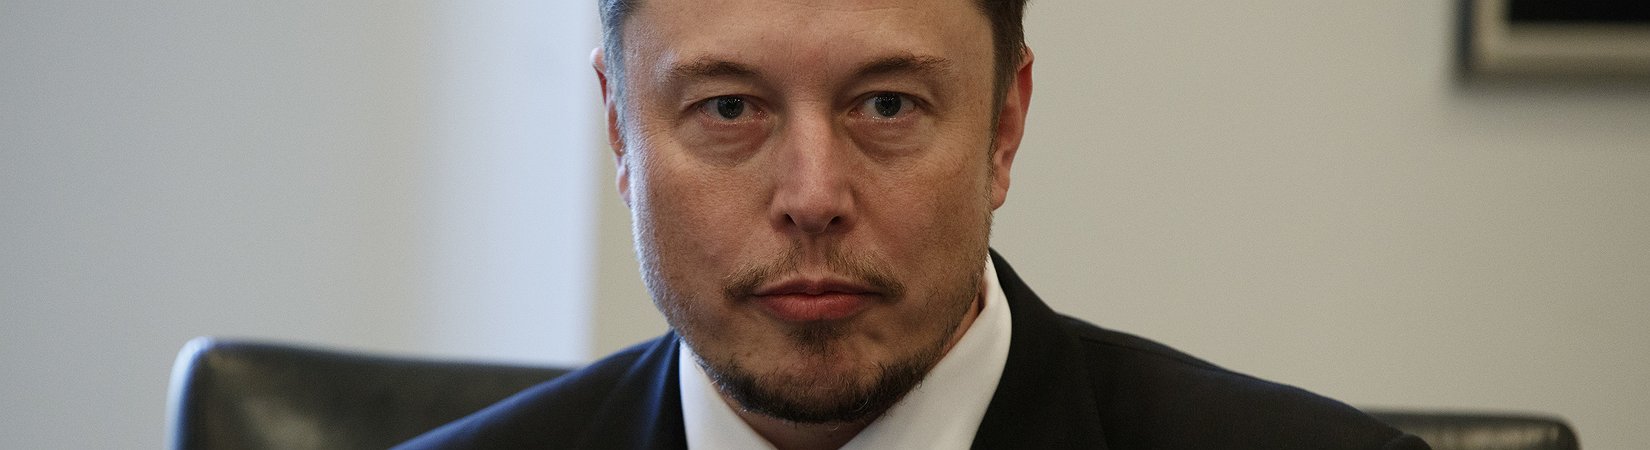 Why Is Elon Musk Promoting Cryptocurrencies? : Is Dogecoin a Pump and Dump? Why People Have Decided to ... : Elon musk, the ceo of tesla and spacex, has been a key proponent in the latest surge of interest in dogecoin, according to analysts, as he consistently tweets about the cryptocurrency.